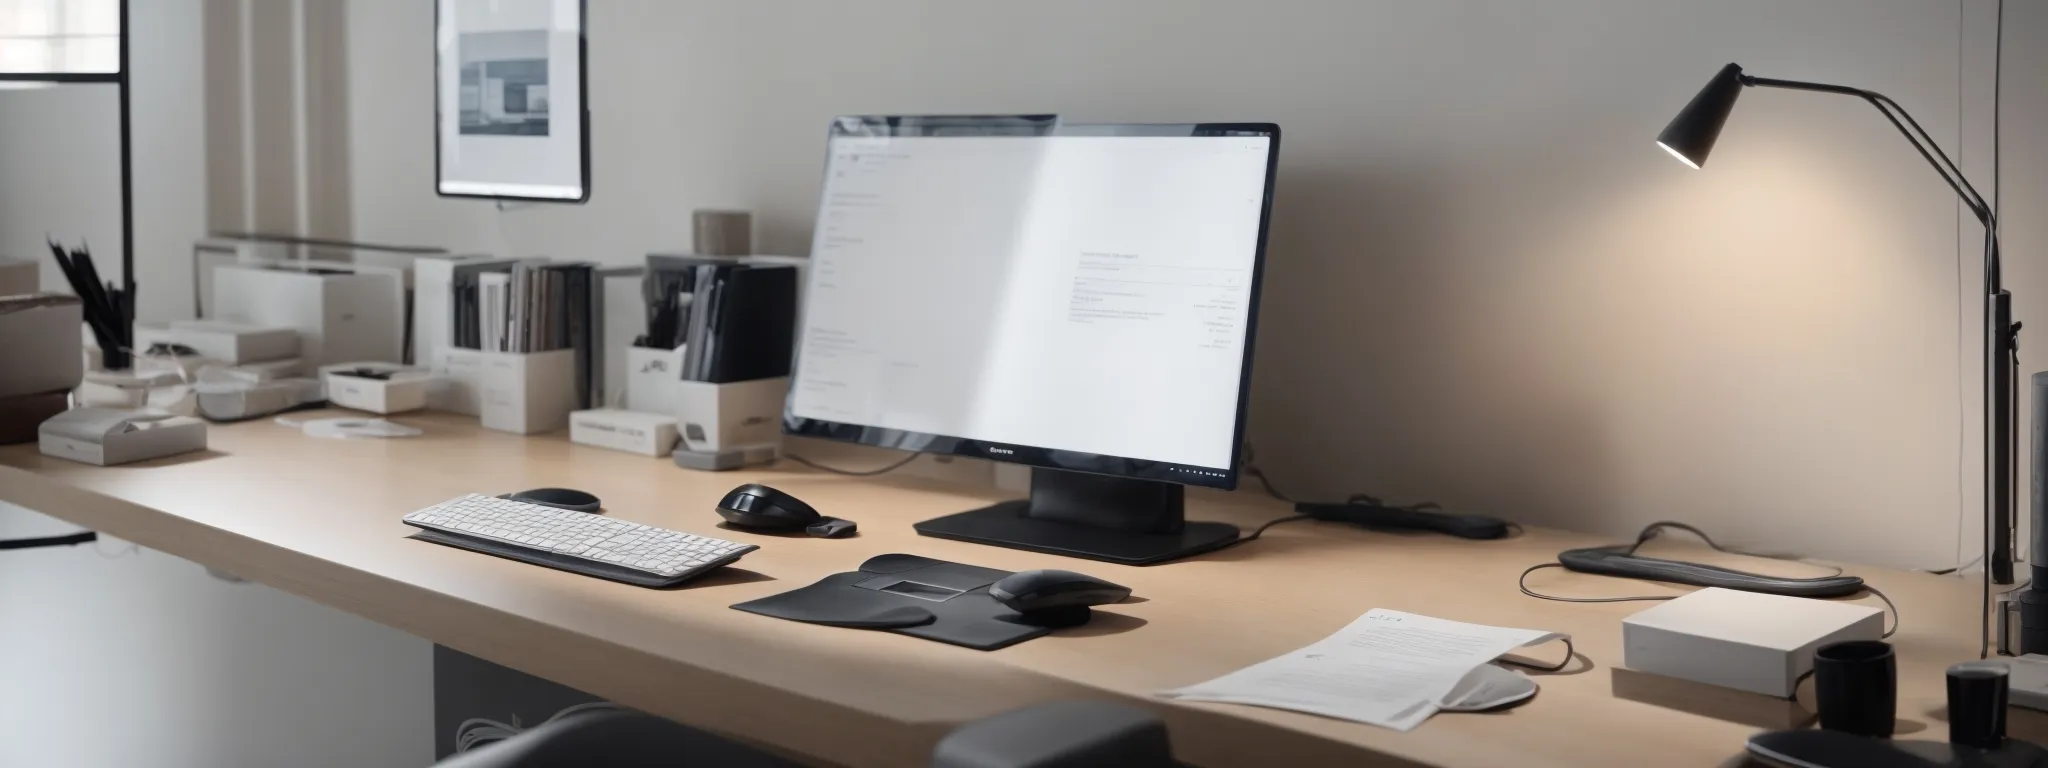 a sleek, minimalist office setup with a computer displaying an outlined document on the screen.